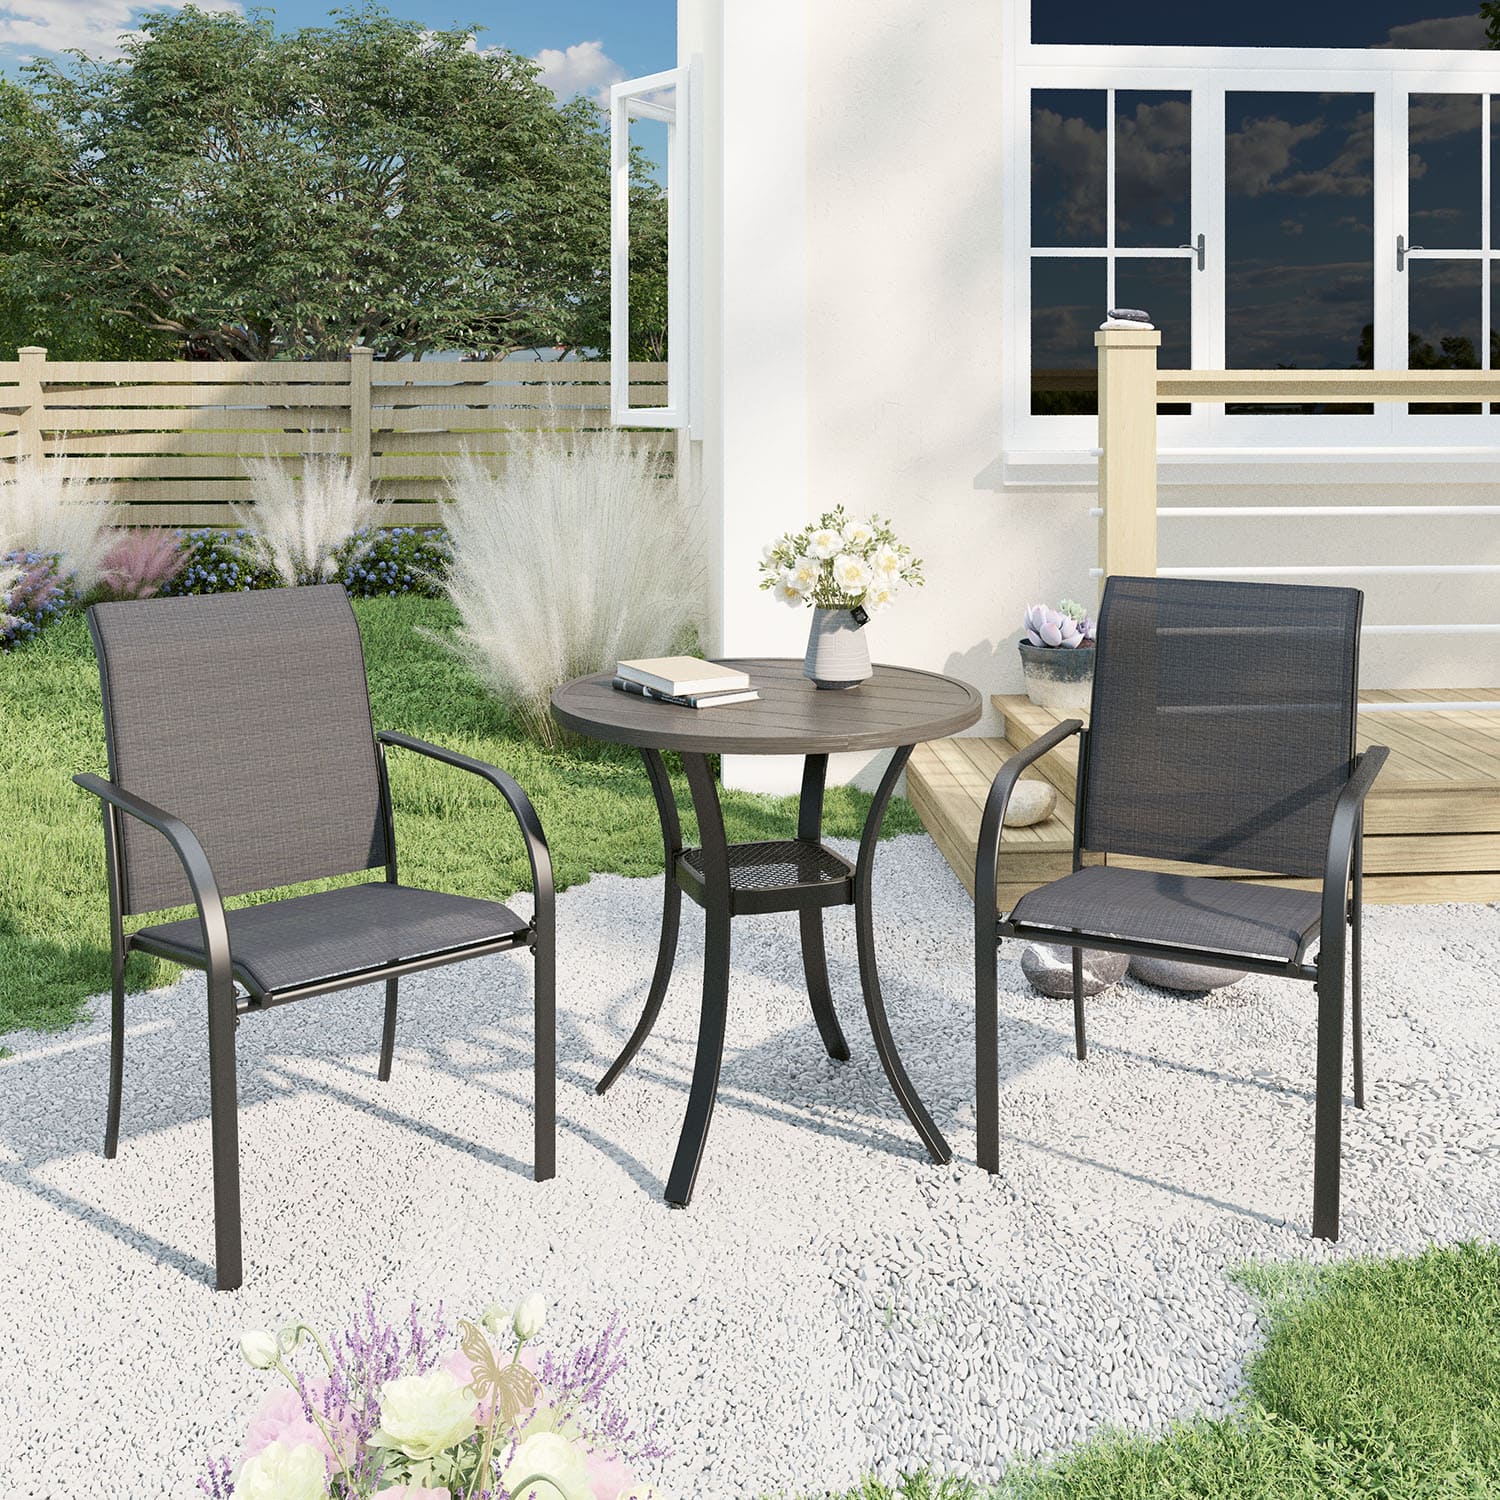 Vicllax 3-Piece Patio Bistro Set, Outdoor Stackable Sling Chairs and Round Bisto Table